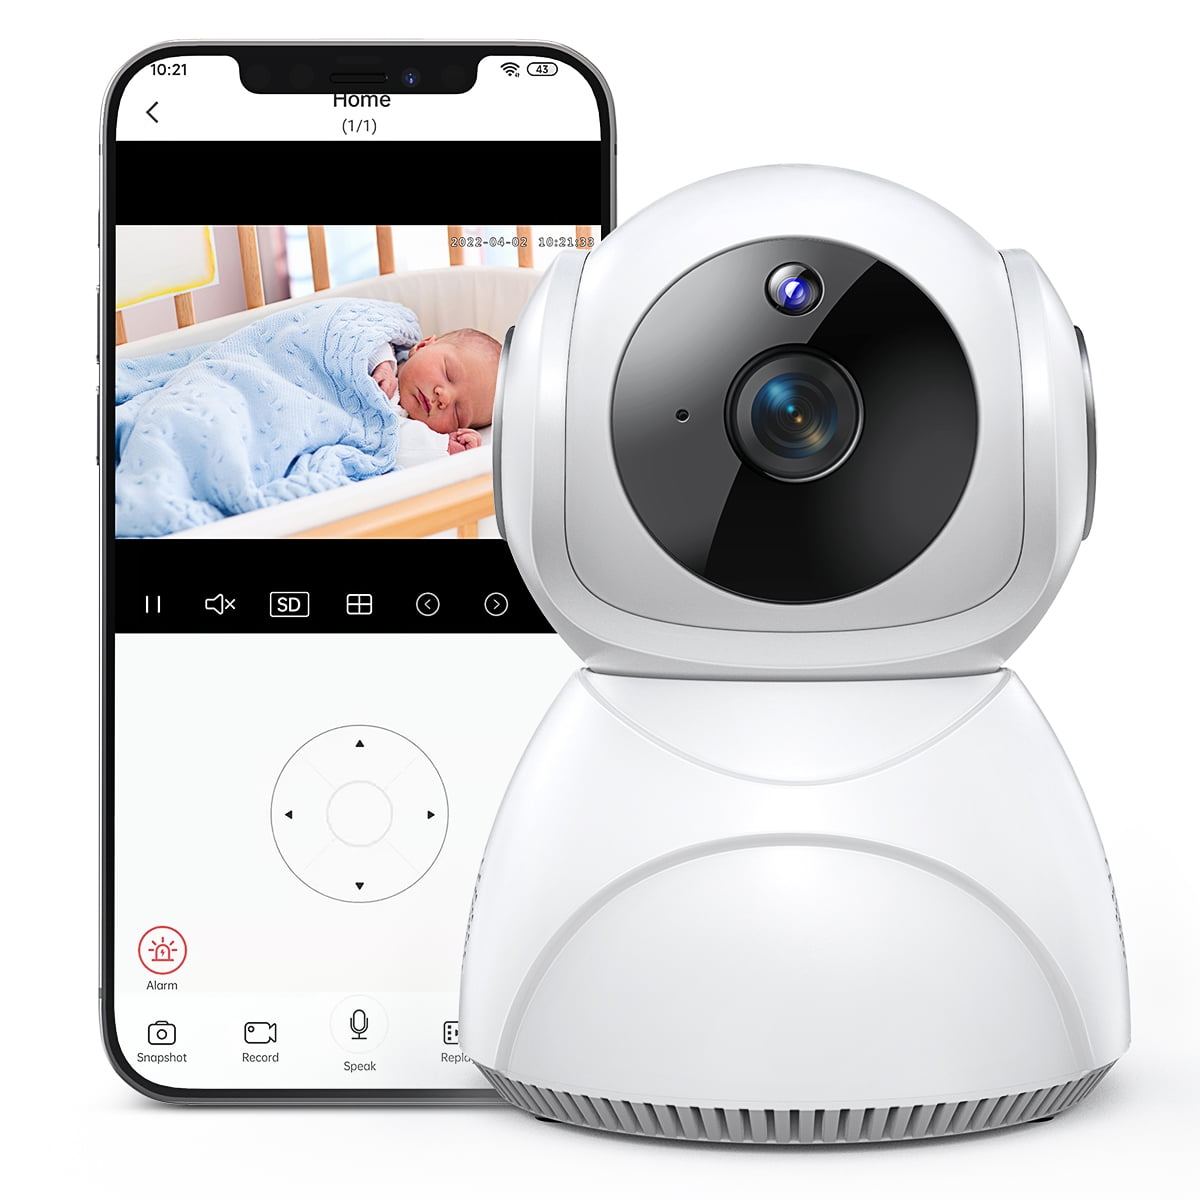 safe sound audio baby monitor Home Security wireless Baby Monitor audio sound 